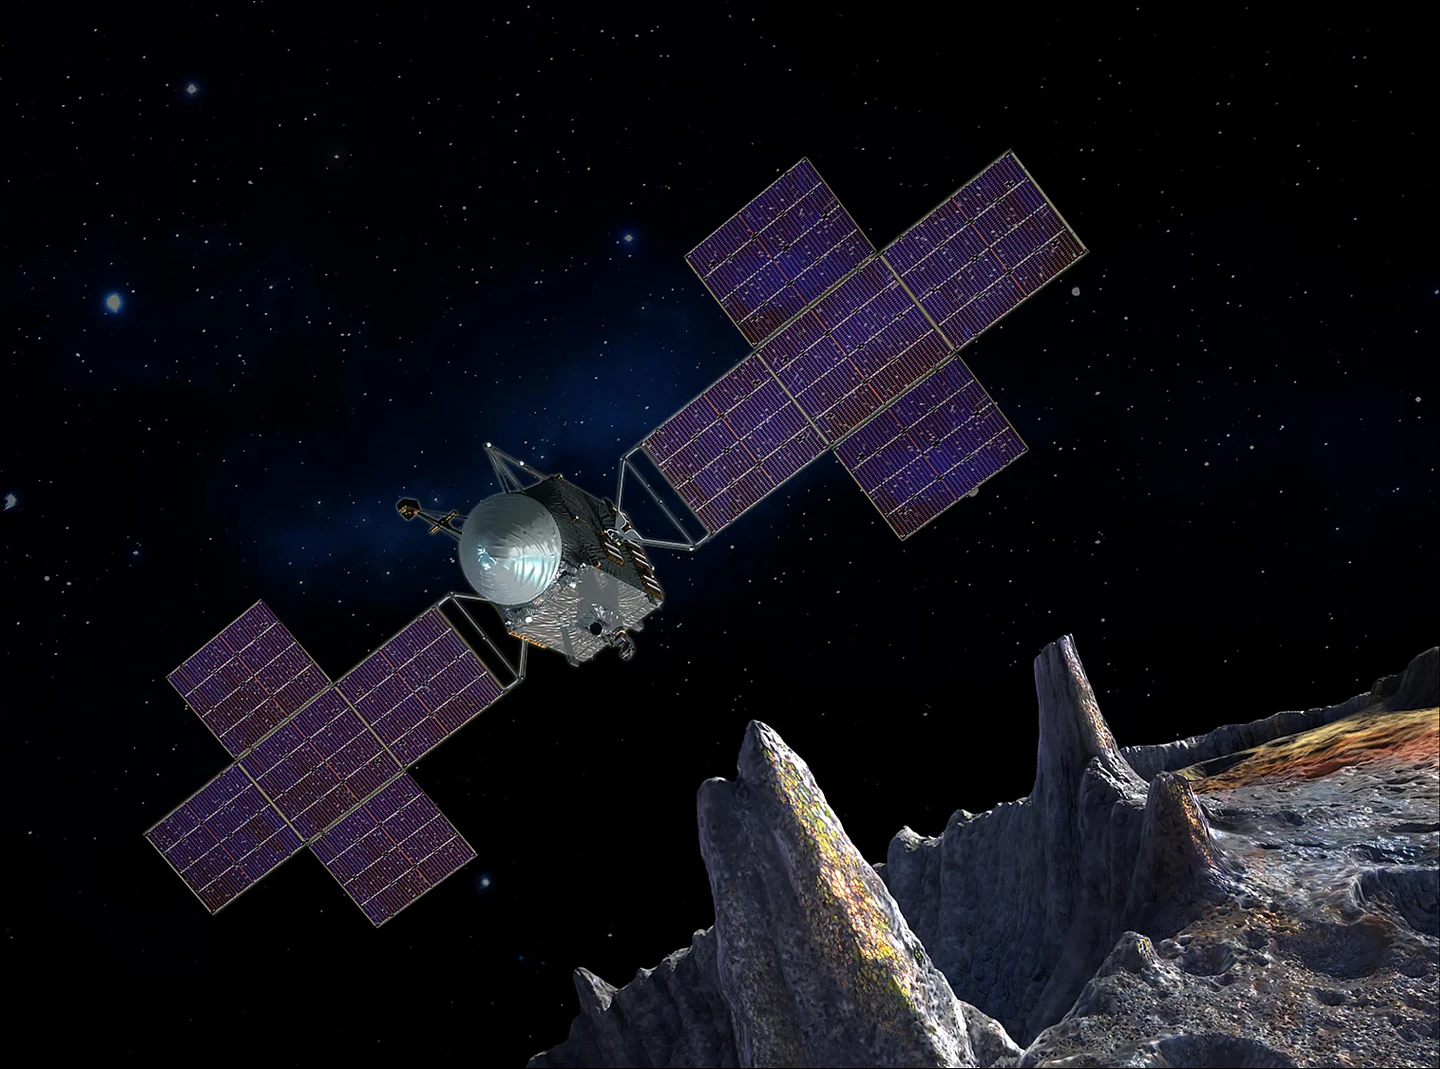 this-artists-rendering-shows-a-blocky-space-probe-to-which-a-dish-antenna-is-mounted-and-from-which-two-solar-panels-extend-in-near-proximity-to-rocky-cratered-surface.webp